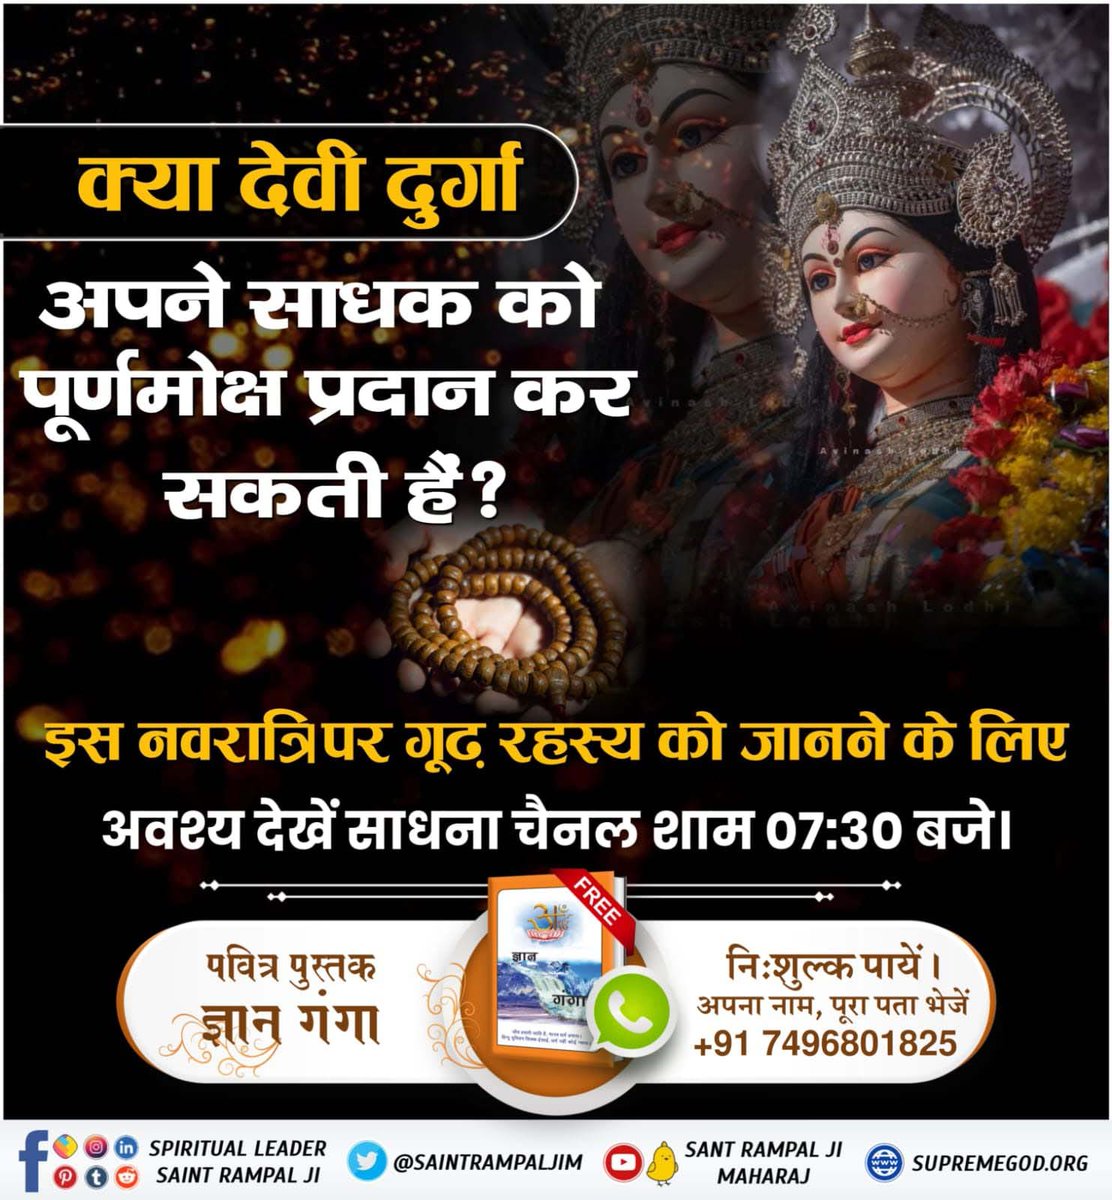 People who are unaware about the ultimate Spiritual Knowledge worship Goddess Durga. But our Holy Scriptures like Vedas and Shrimad Bhagwat Gita suggest worshiping Almighty God Kabir Saheb. ⤵️⤵️ #भूखेबच्चेदेख_मां_कैसे_खुश_हो